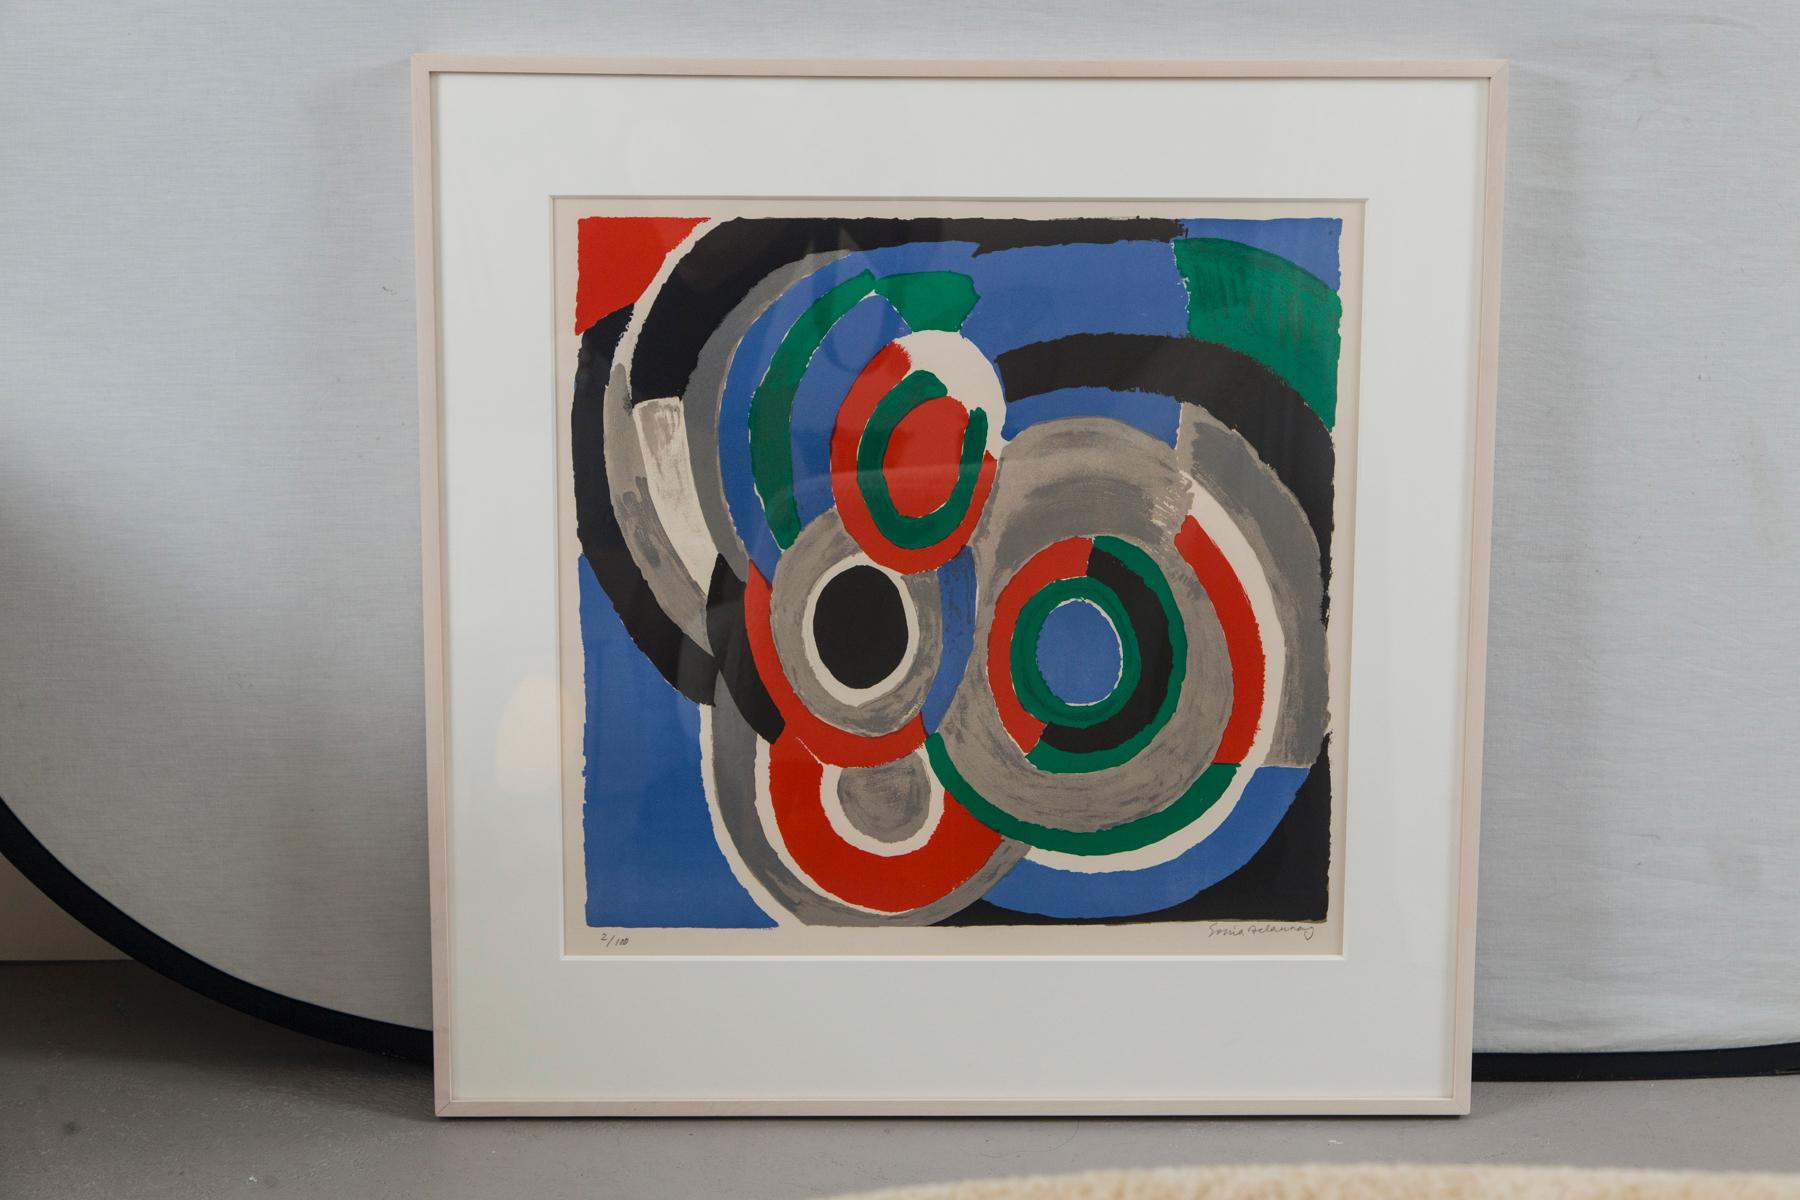 Sonia Delaunay lithograph, signed and editioned 2/100 in pencil on print recto.